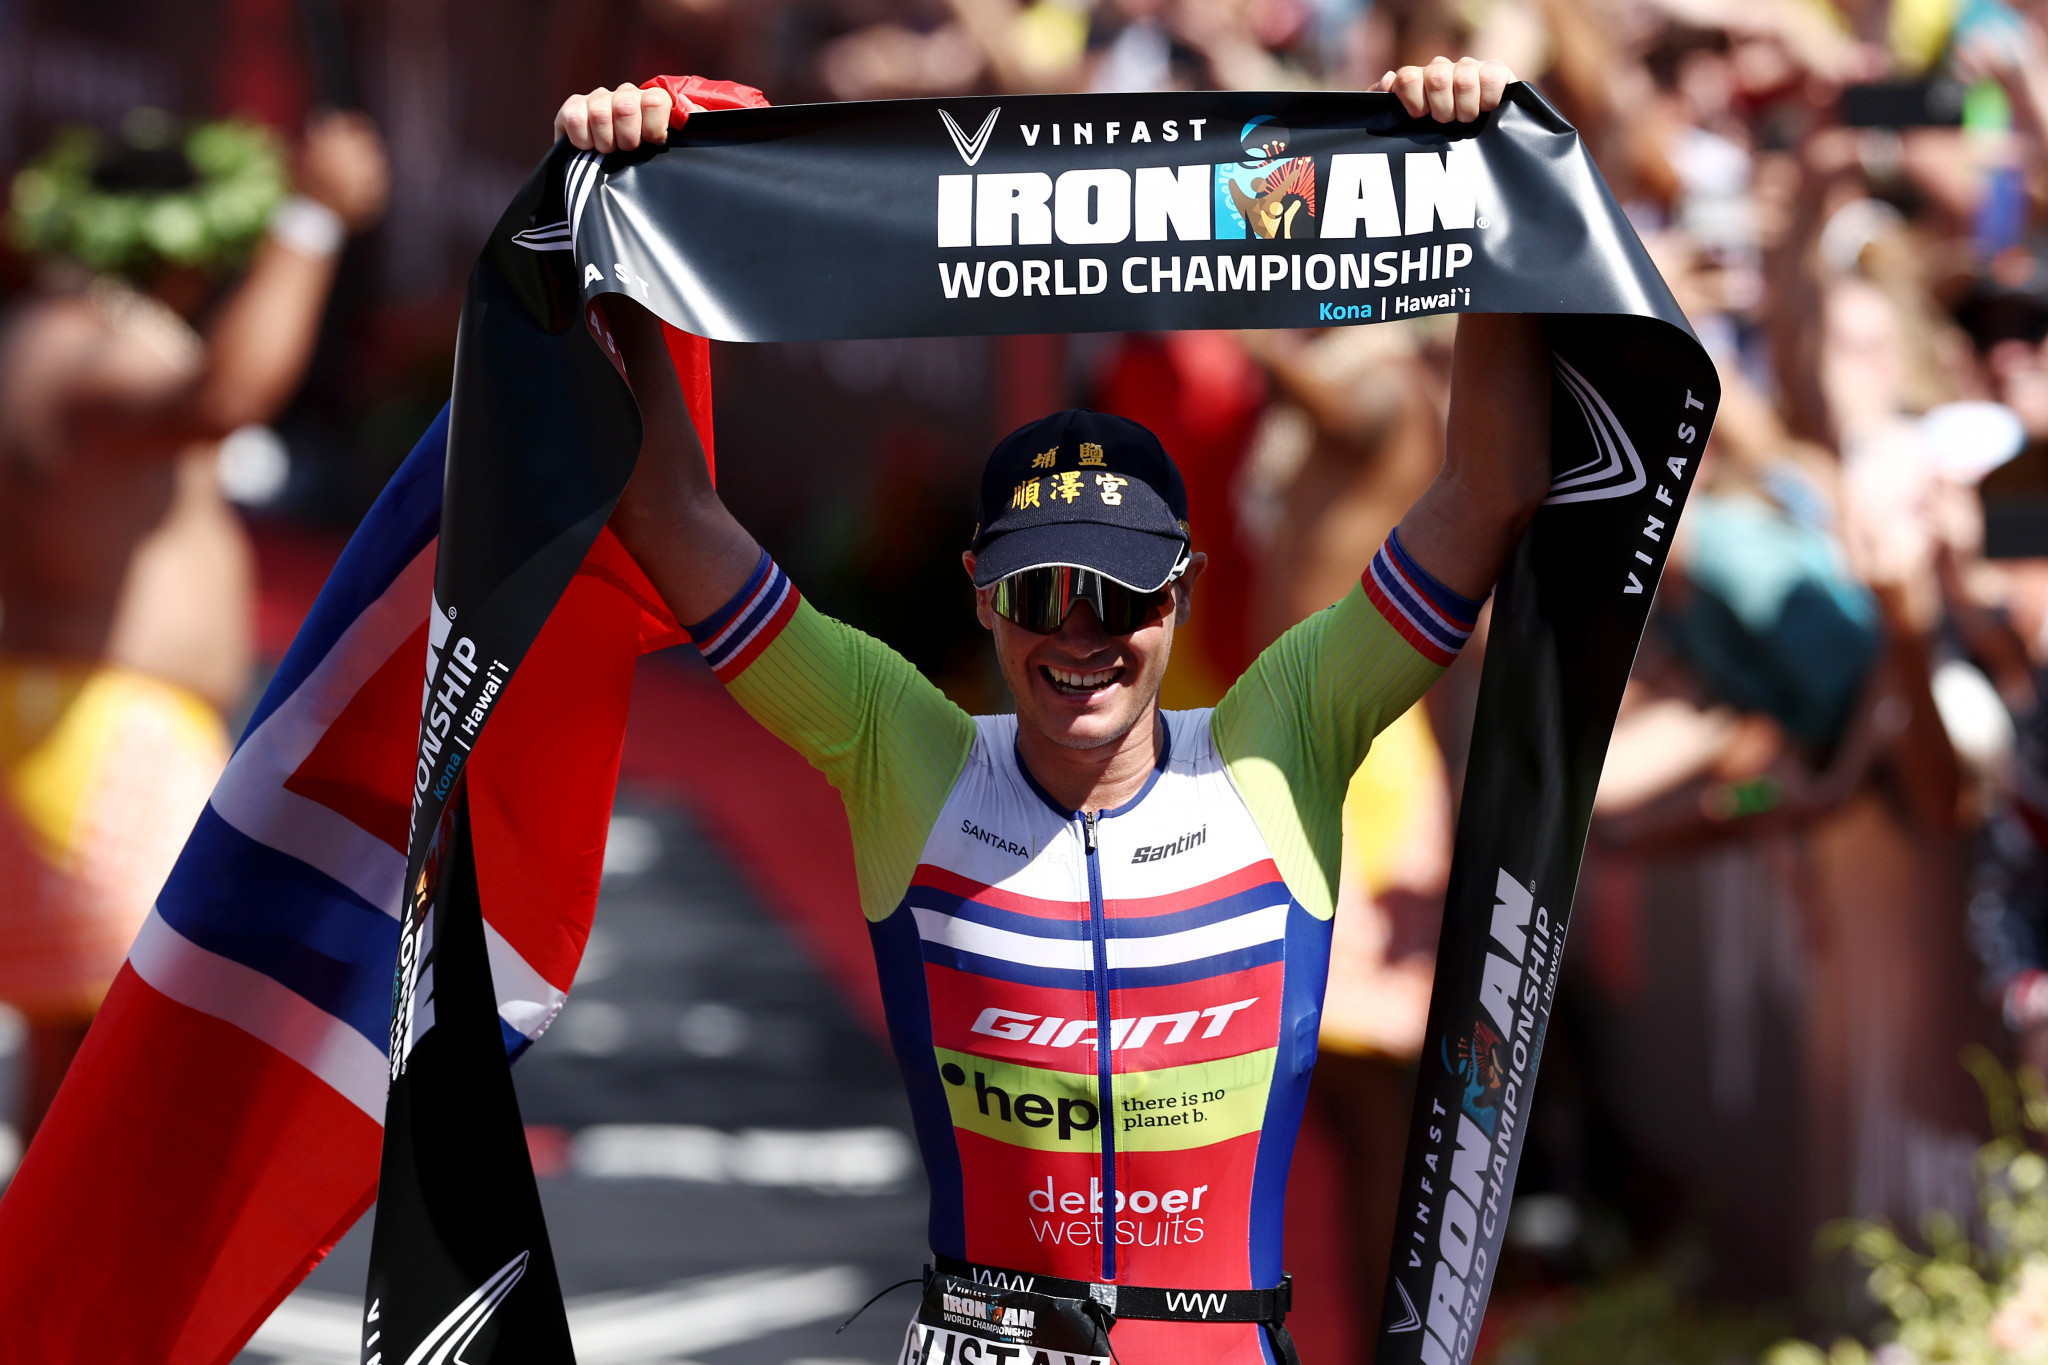 Iden wins Ironman World Championship in course record